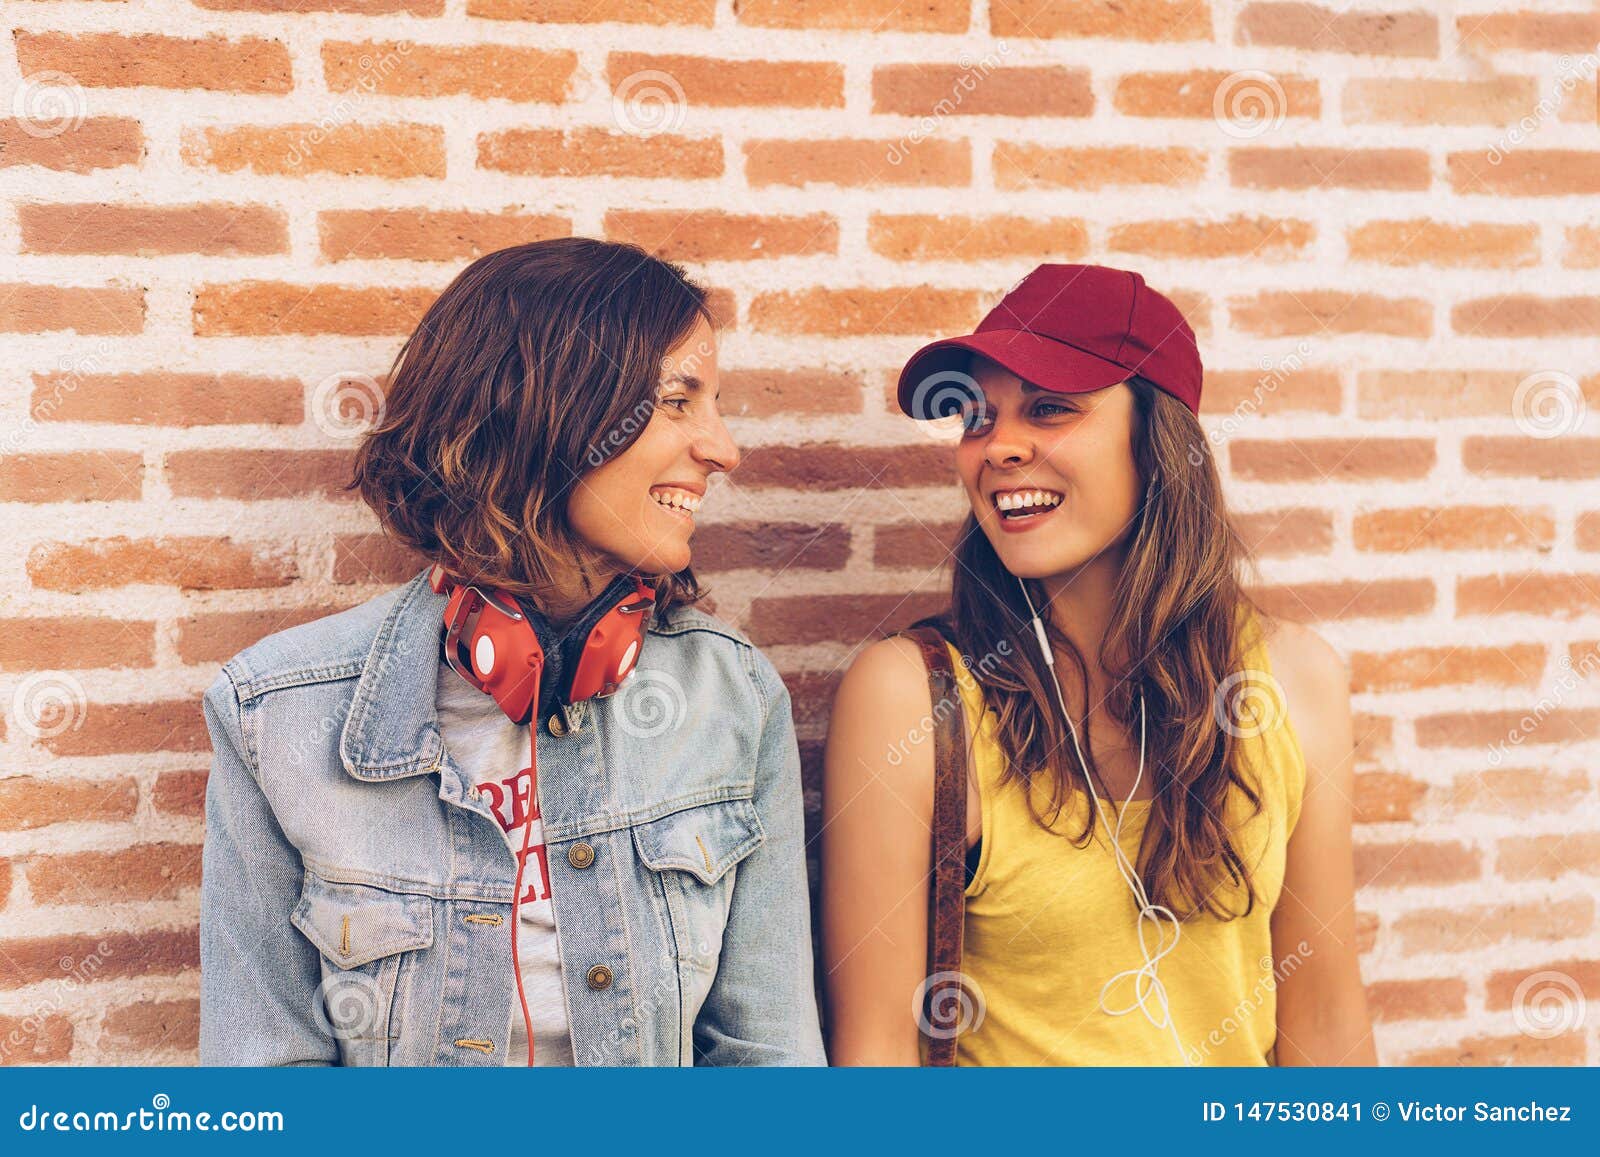 Young Women Couple Looking and Smiling Each Other in a Brick Wall Background image